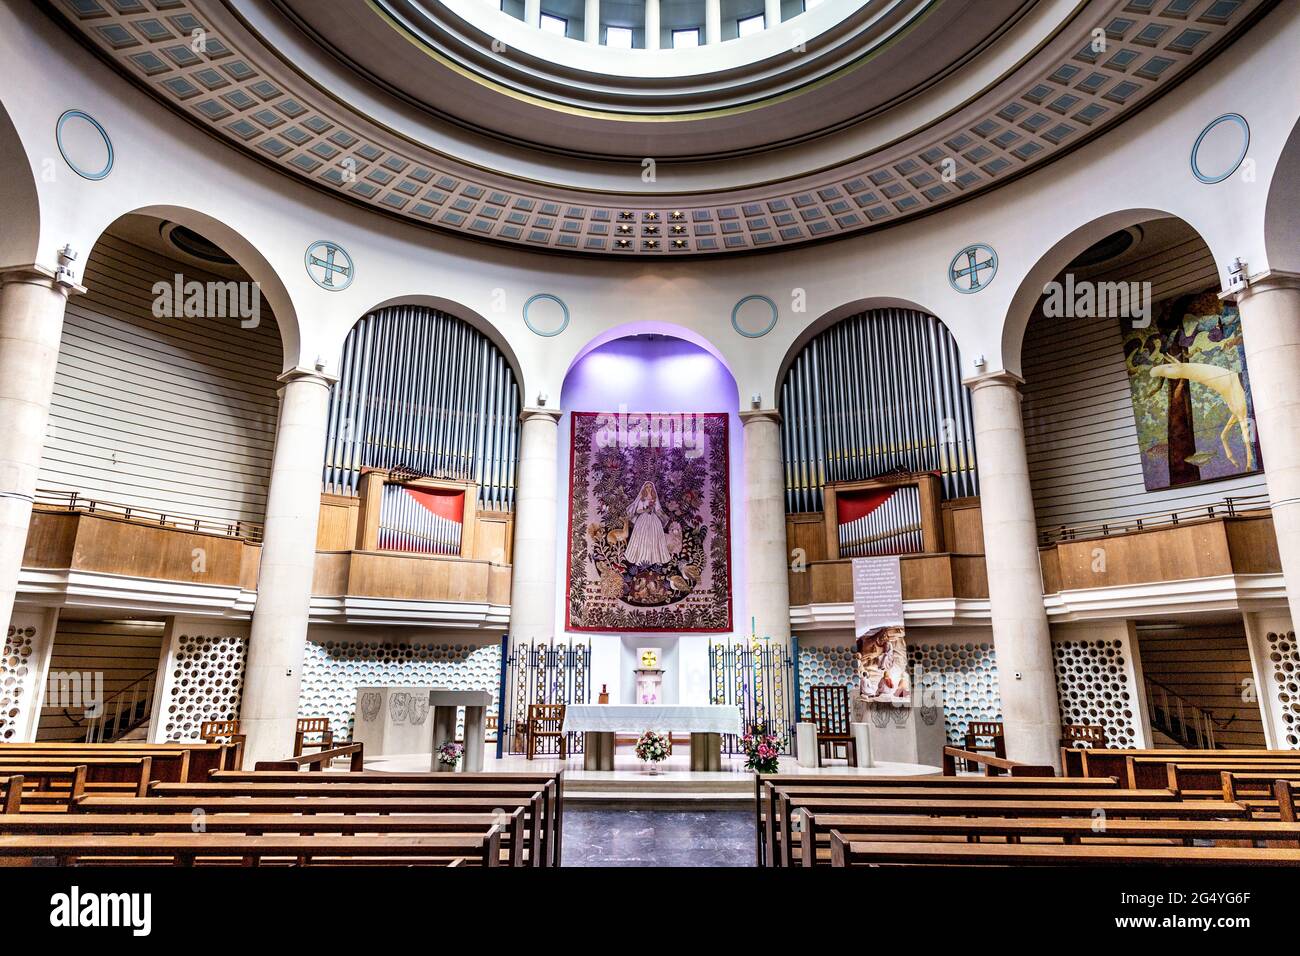 Altar of Notre Dame de France with Aubusson tapestry by Dom Robert, Leicester Square, London, UK Stock Photo